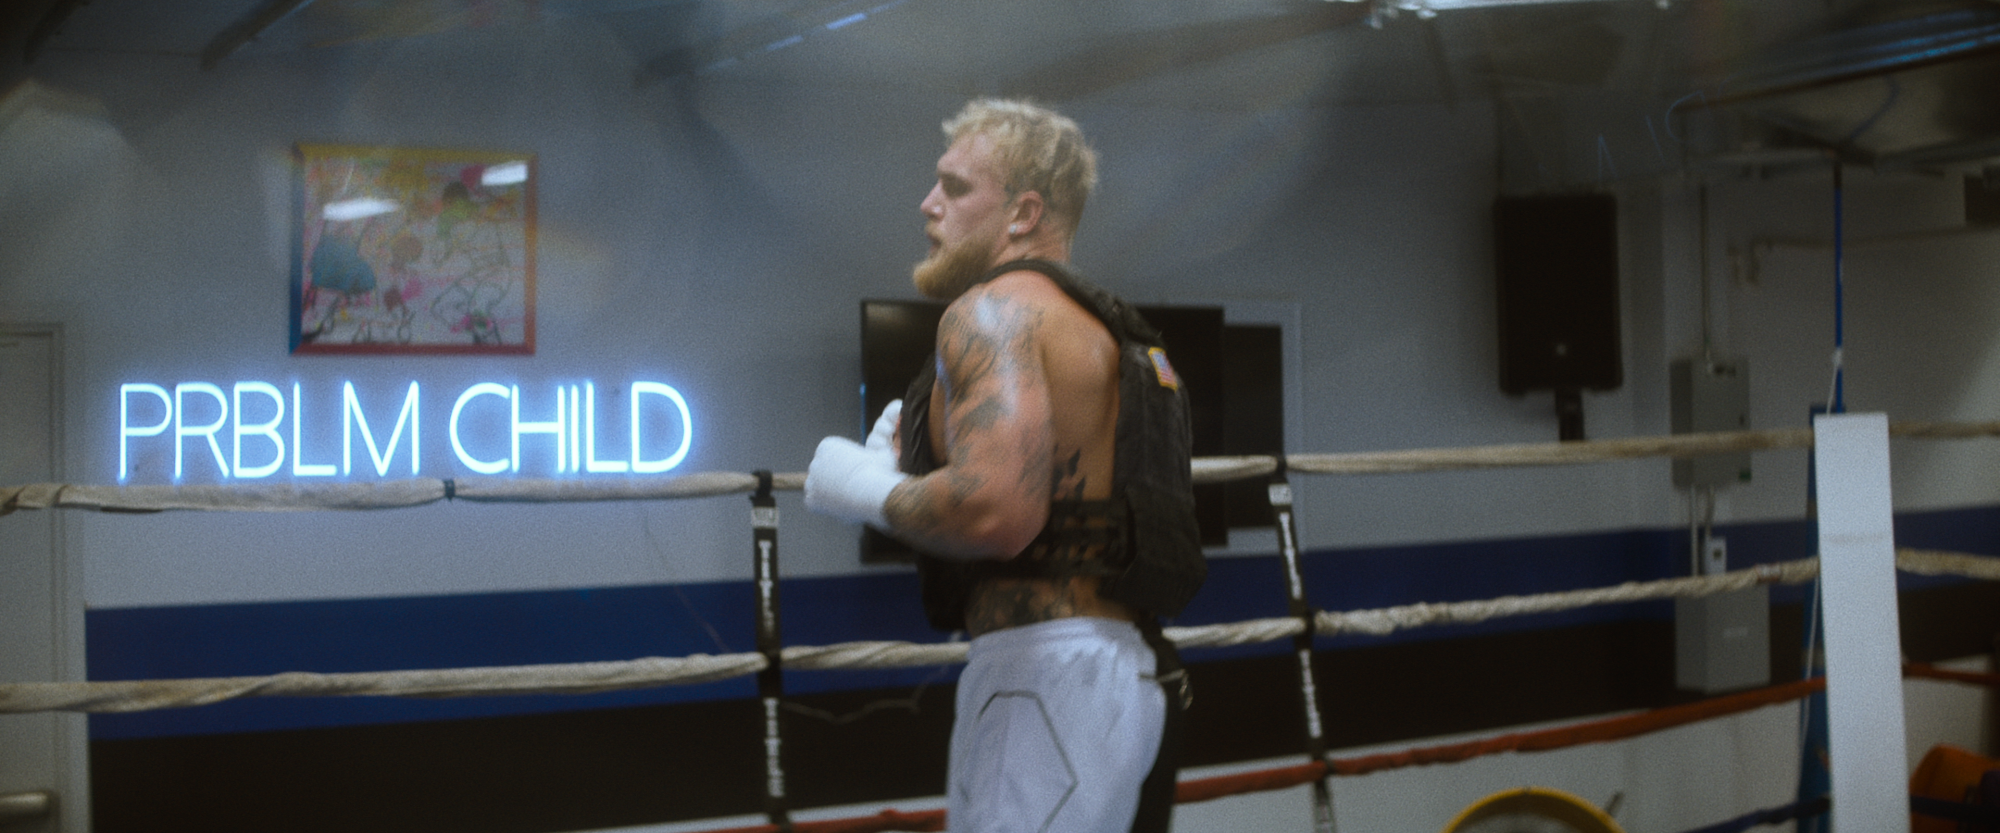 Jake Paul in the boxing ring at the gym. Behind him a neon sign reads "PRBLM CHLD."